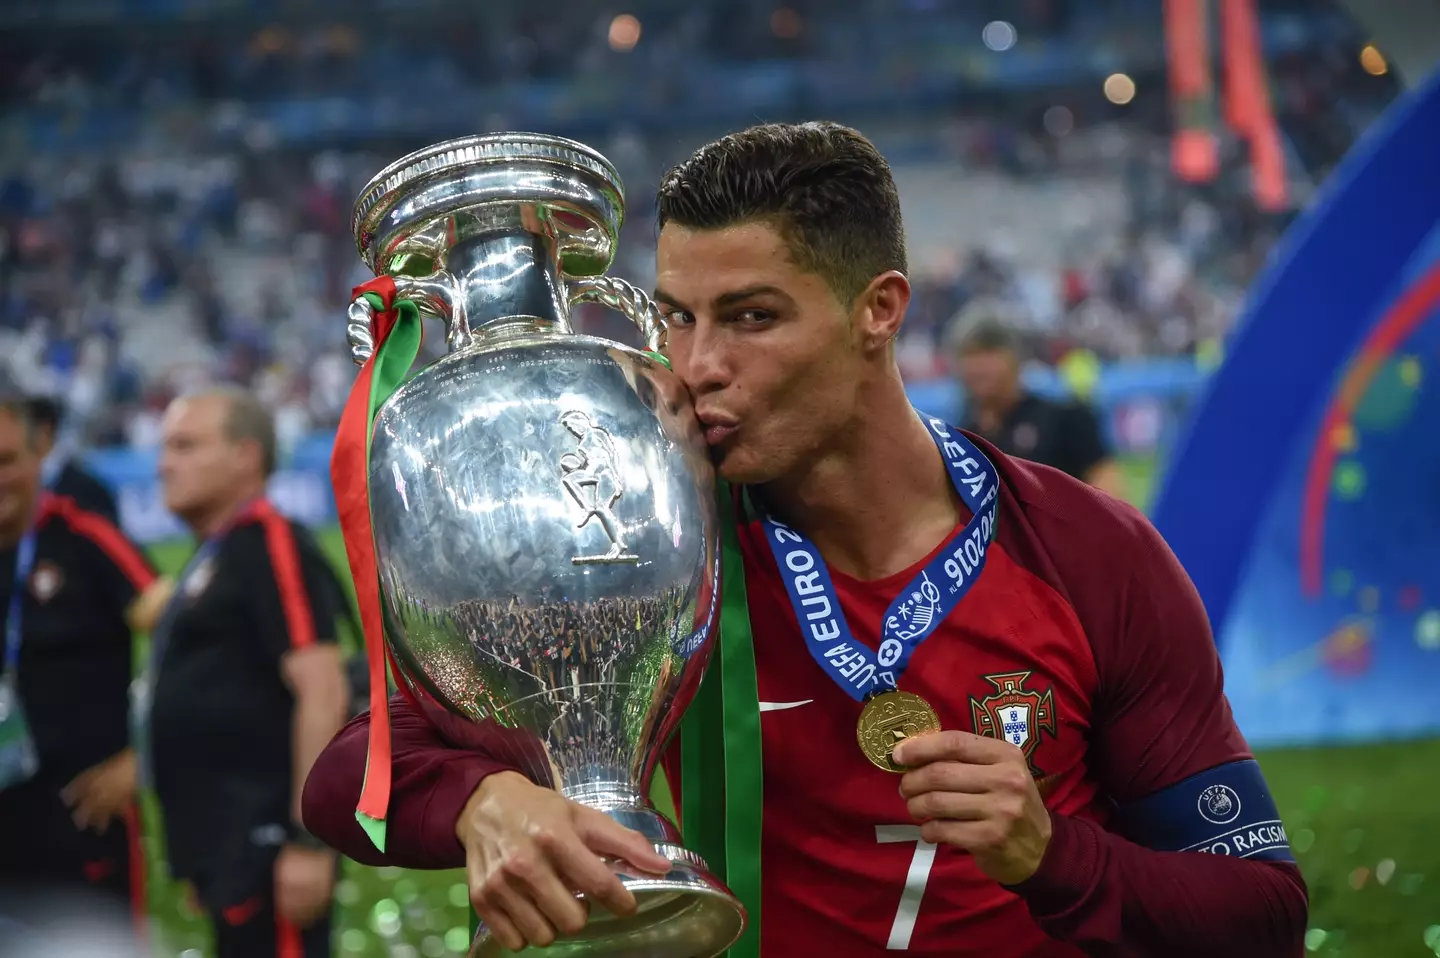 Cristiano Ronaldo with the European Championship trophy after Portugal’s win over France in the 2016 final.